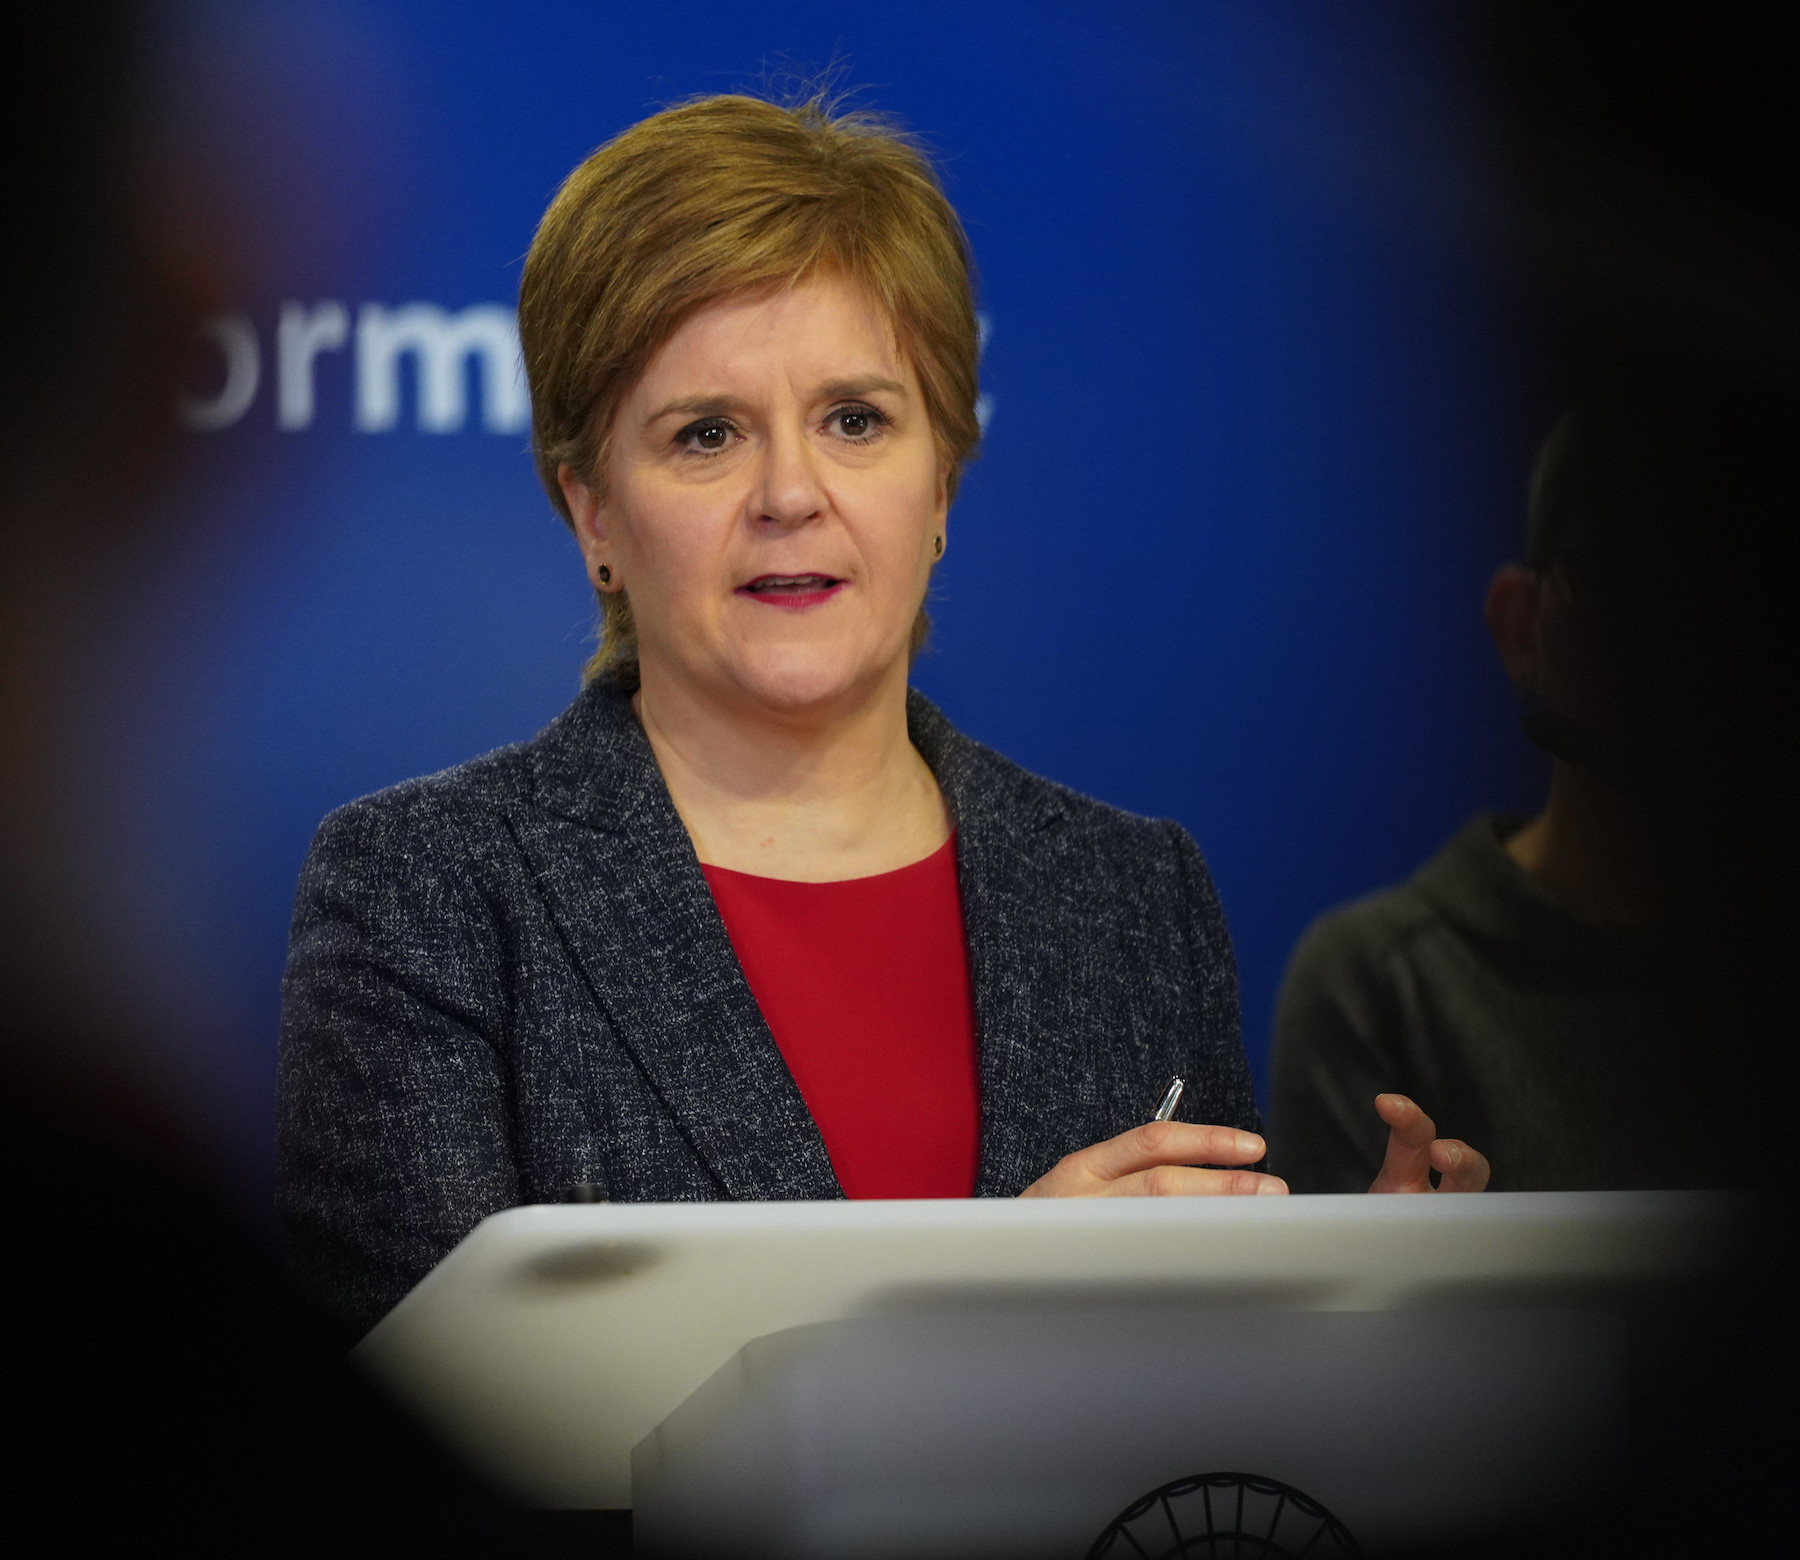 Business figures react to First Minister's resignation